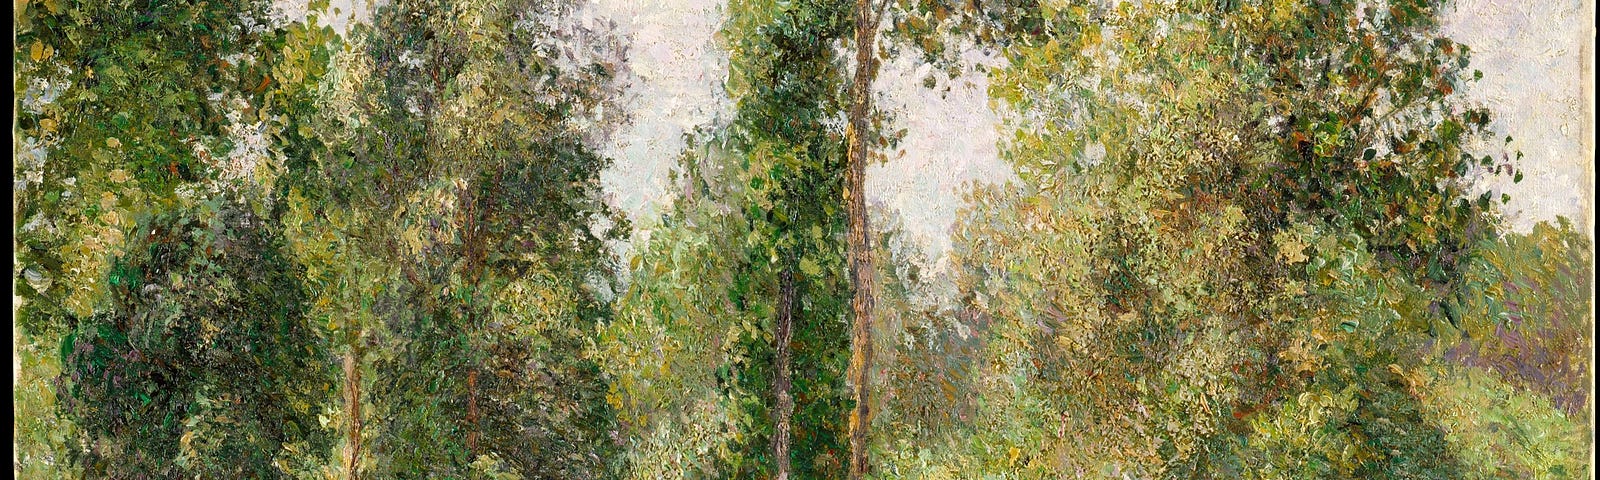 An impressionist painting, predominantly green, showing a garden in the foreground, a wooden fence in the middle ground and tall trees in the background. Near the wooden fence is the hint of a person.